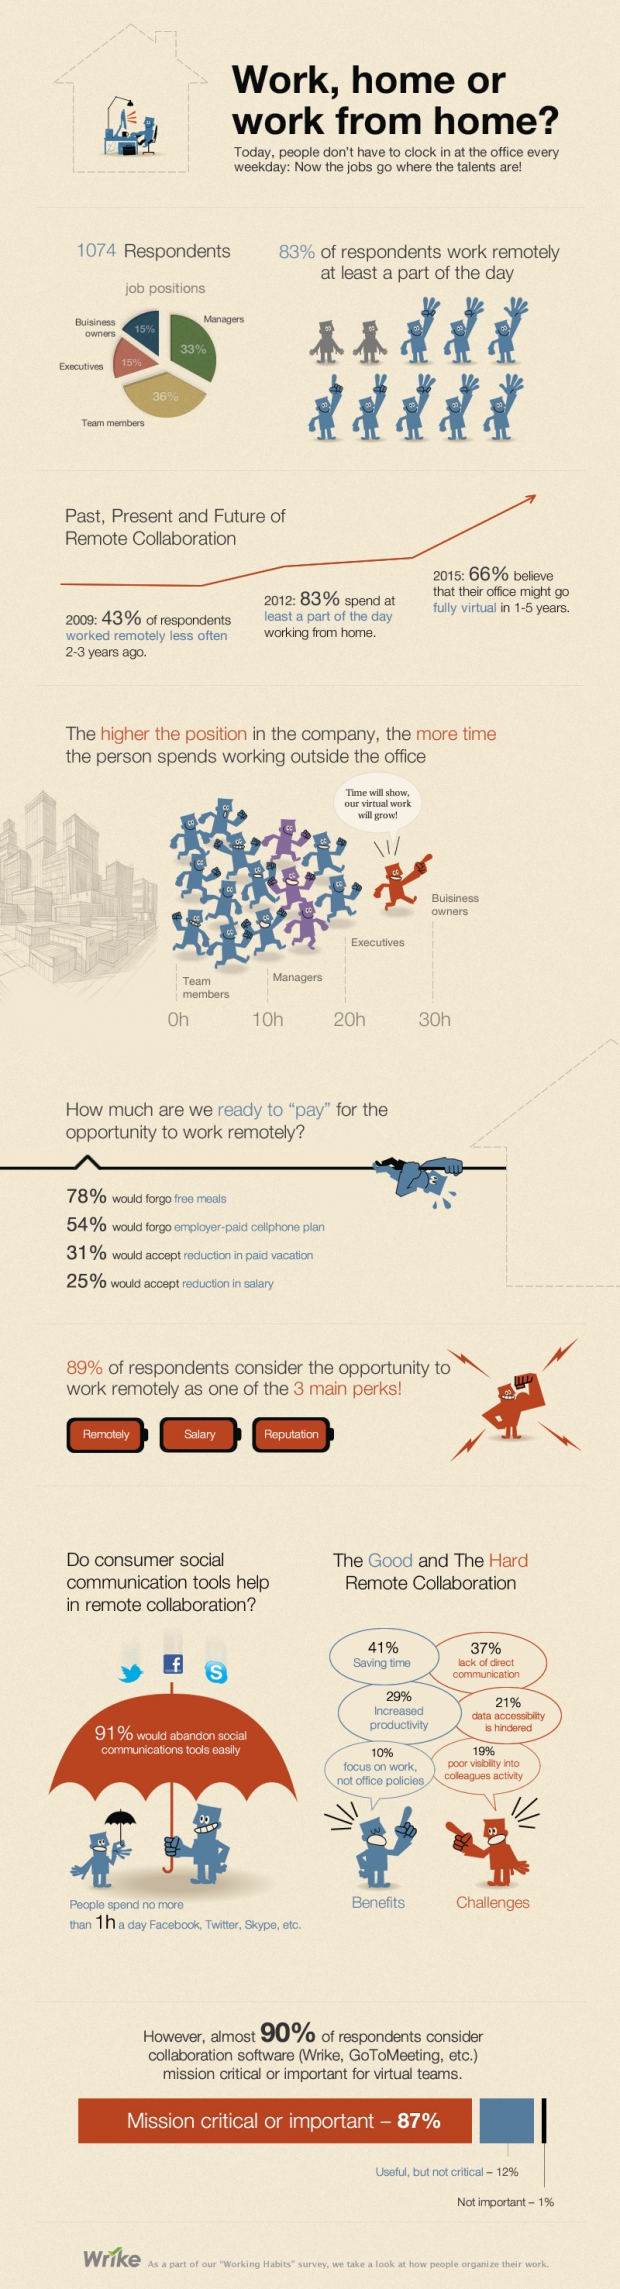 working at home / homeoffice infographic